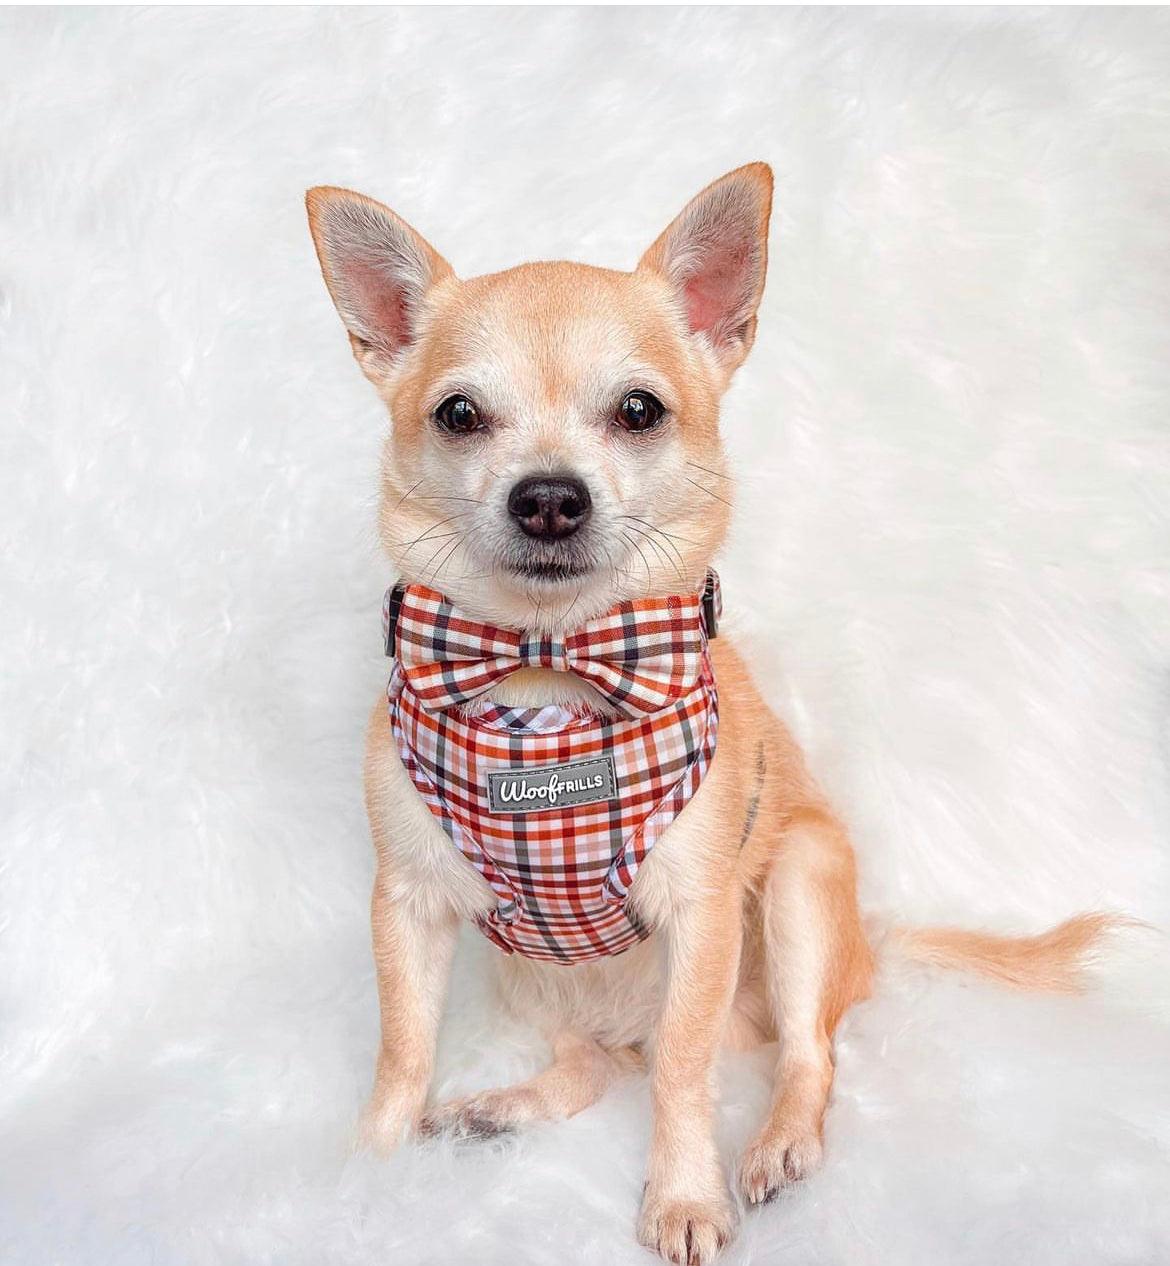 chihuahua wearing a xs dog harness and dicky dog bow tie